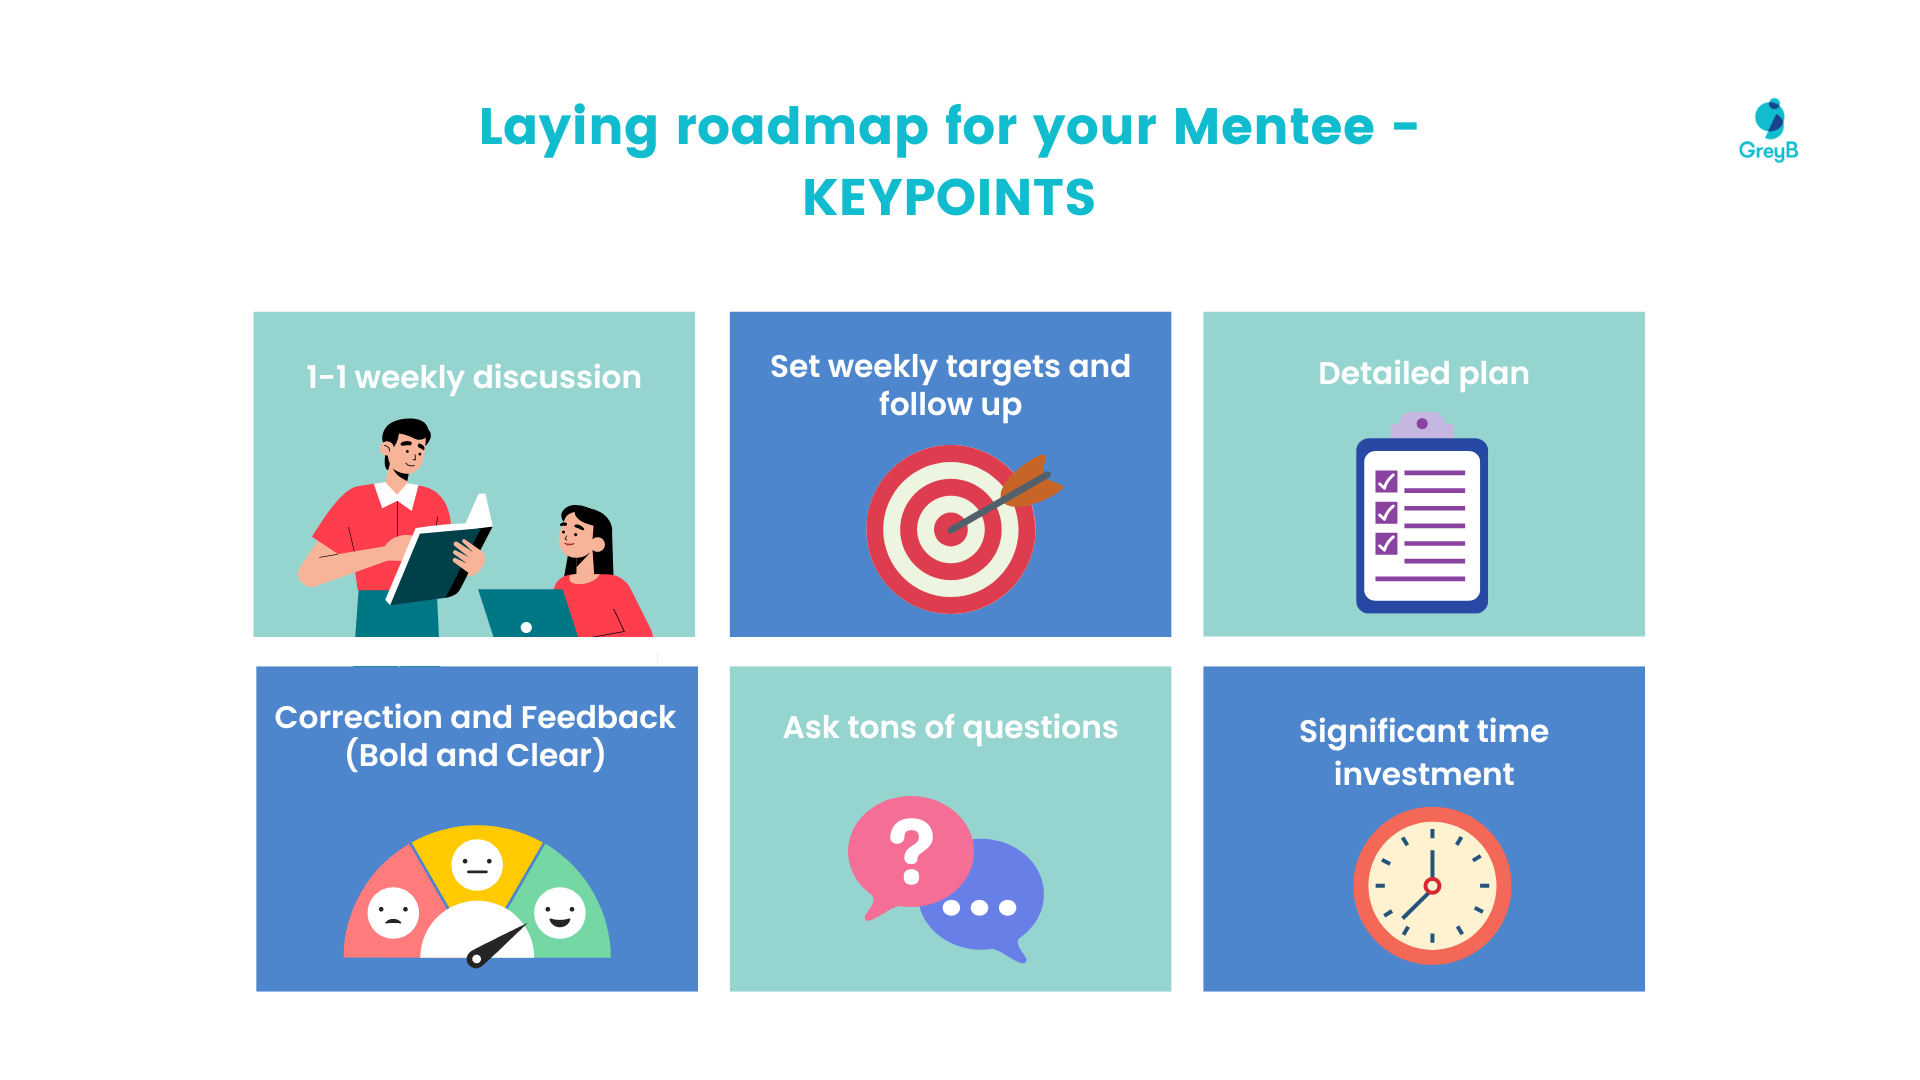 Laying the roadmap for your mentee - KEYPOINTS for a mentor-mentee relationship